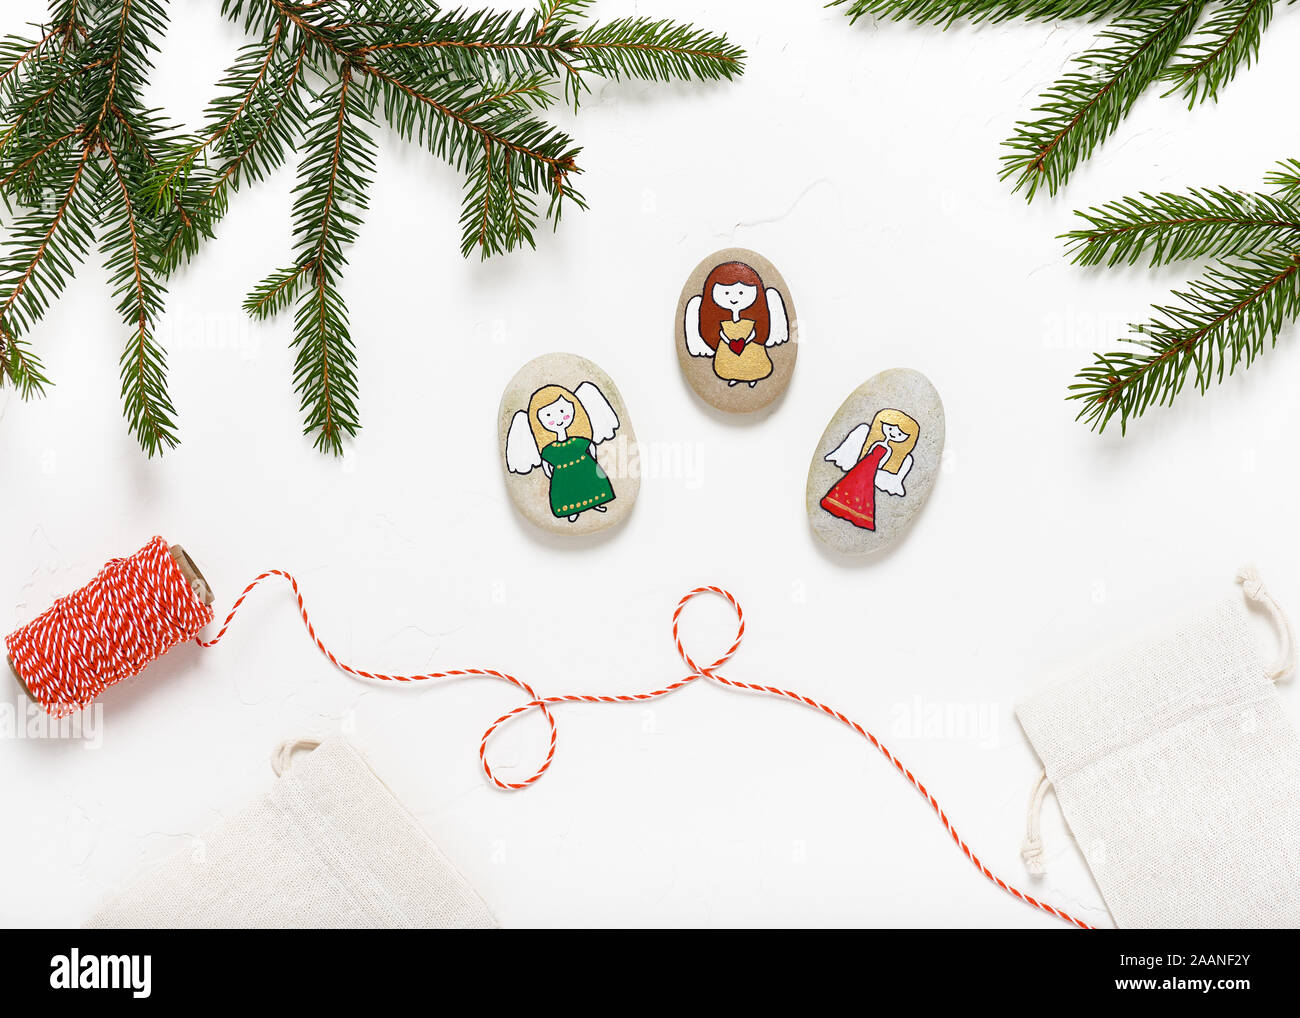 Stones decorated with Christmas motifs as Angels. Top view. Stock Photo